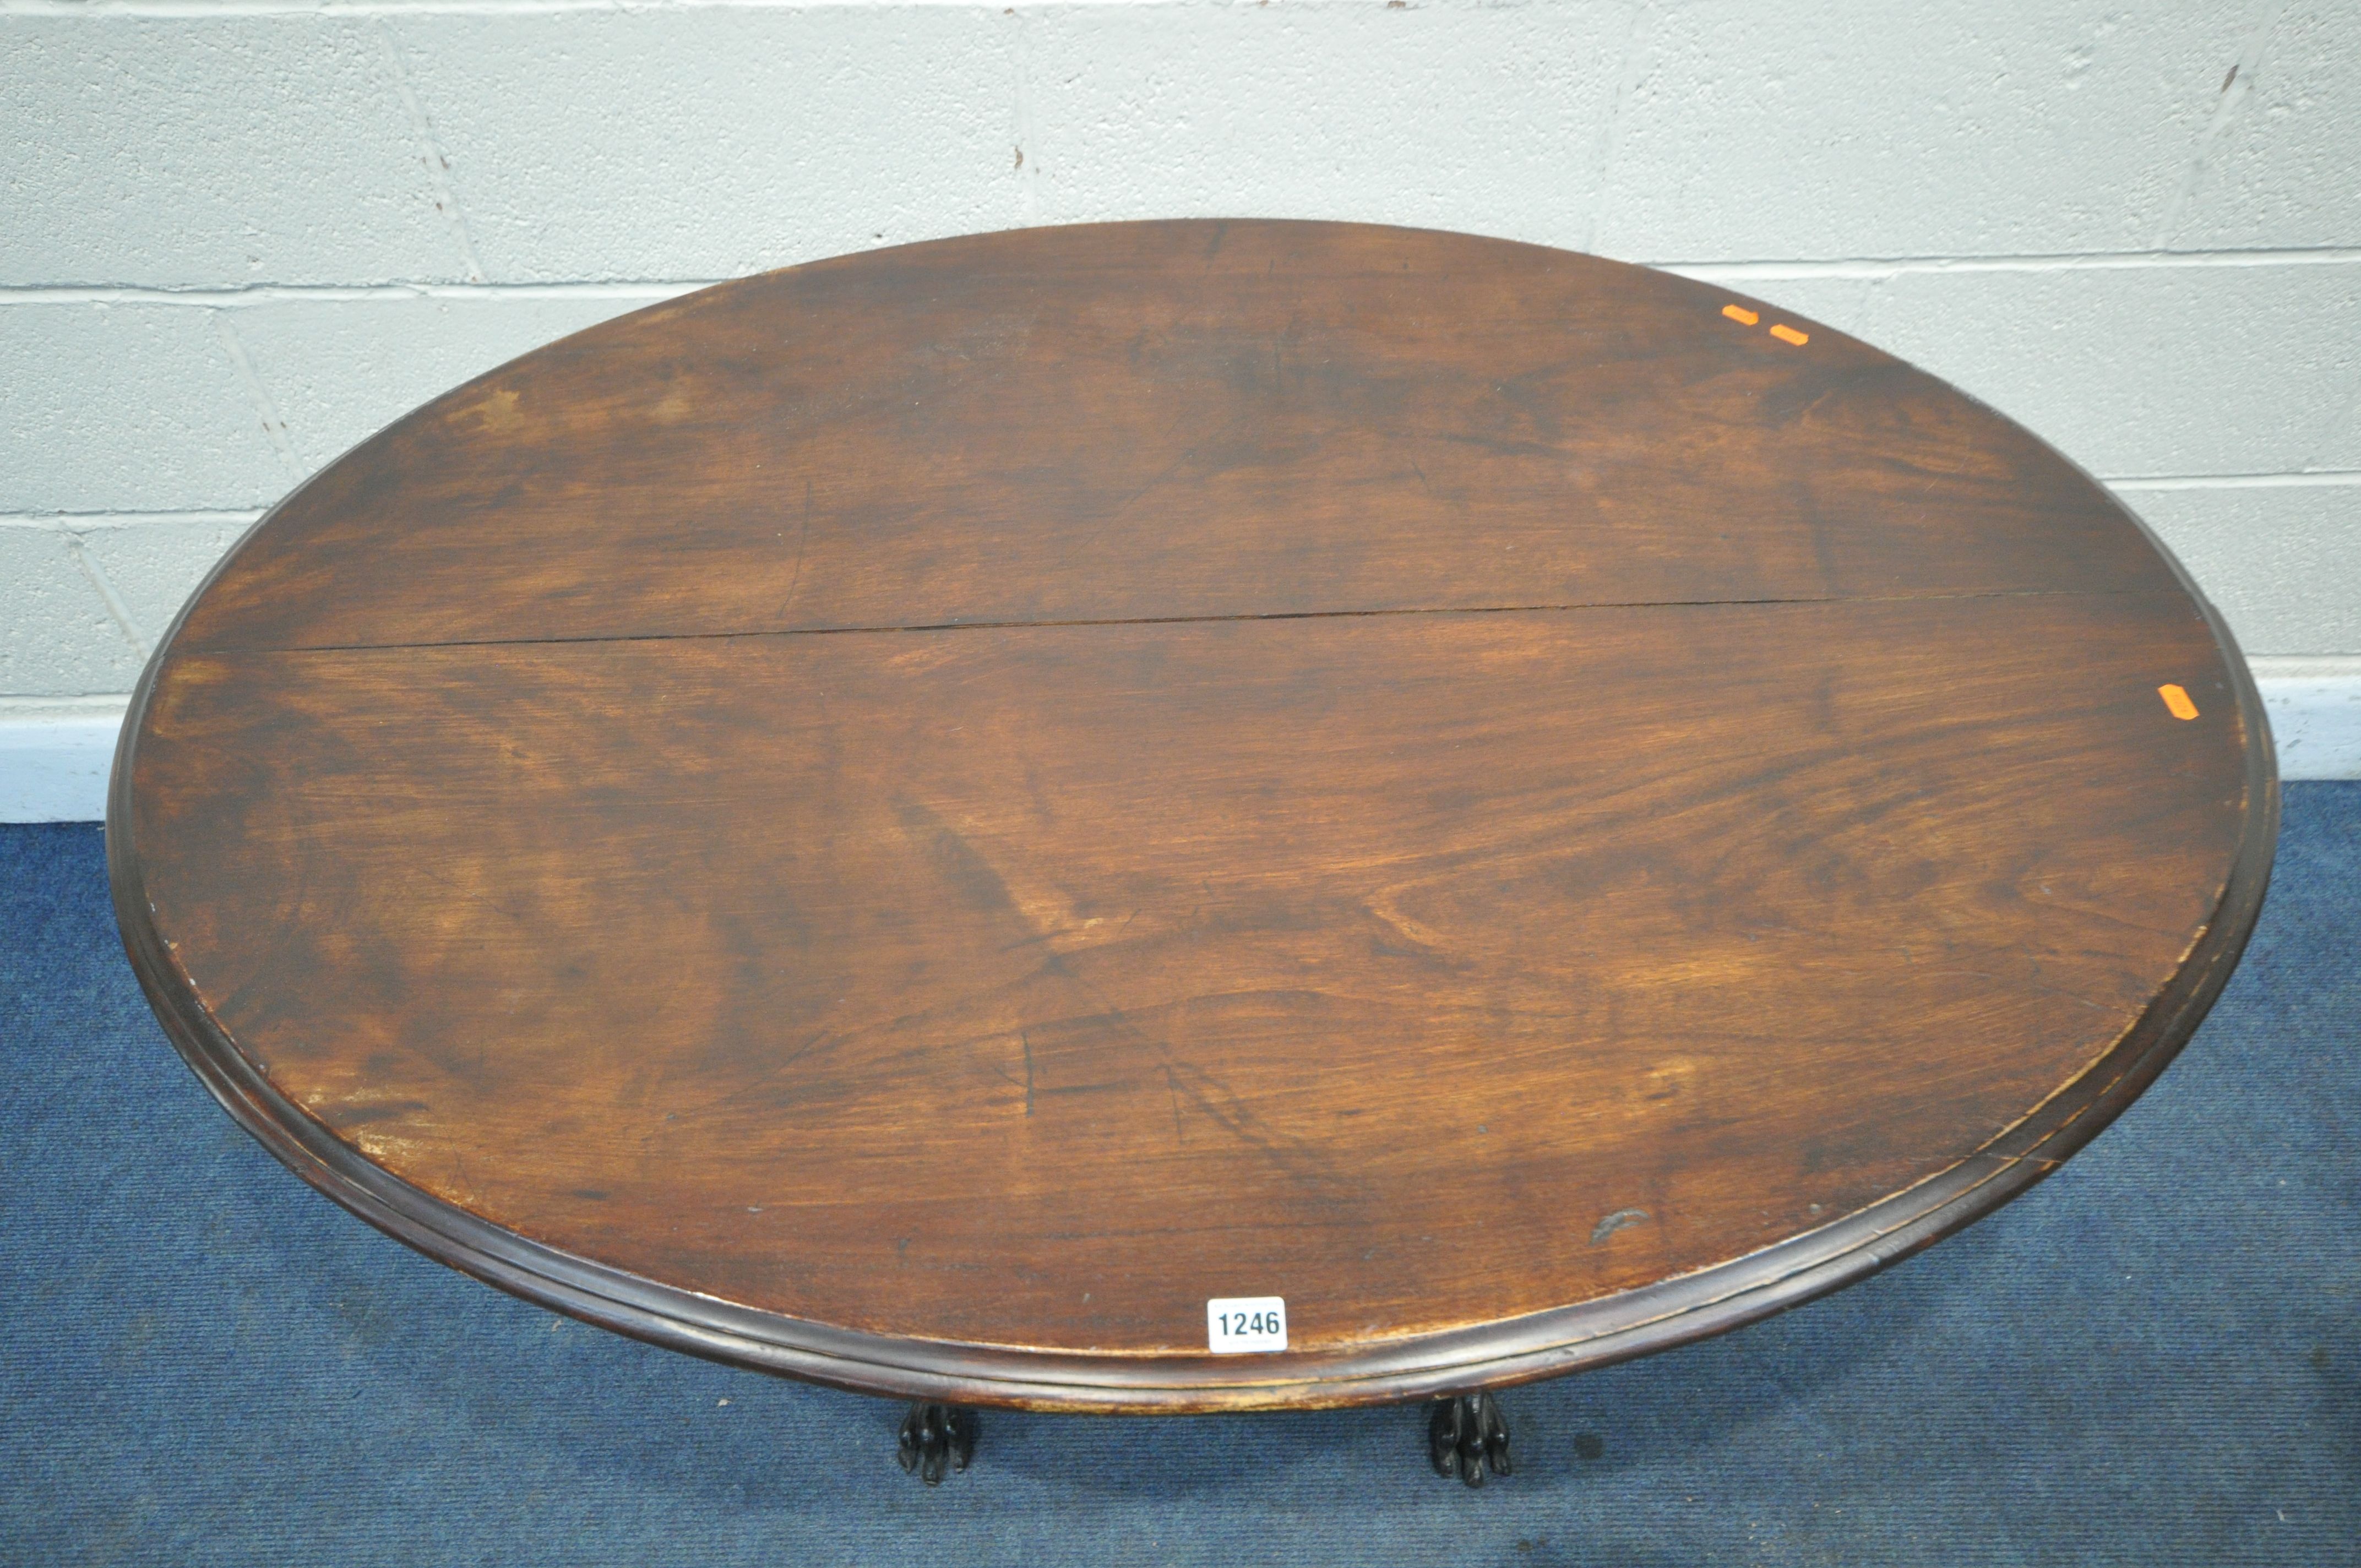 A LATE 19TH/EARLY 20TH CENTURY OVAL CENTRE TABLE, the mahogany top on an ebonised base, with - Image 2 of 5